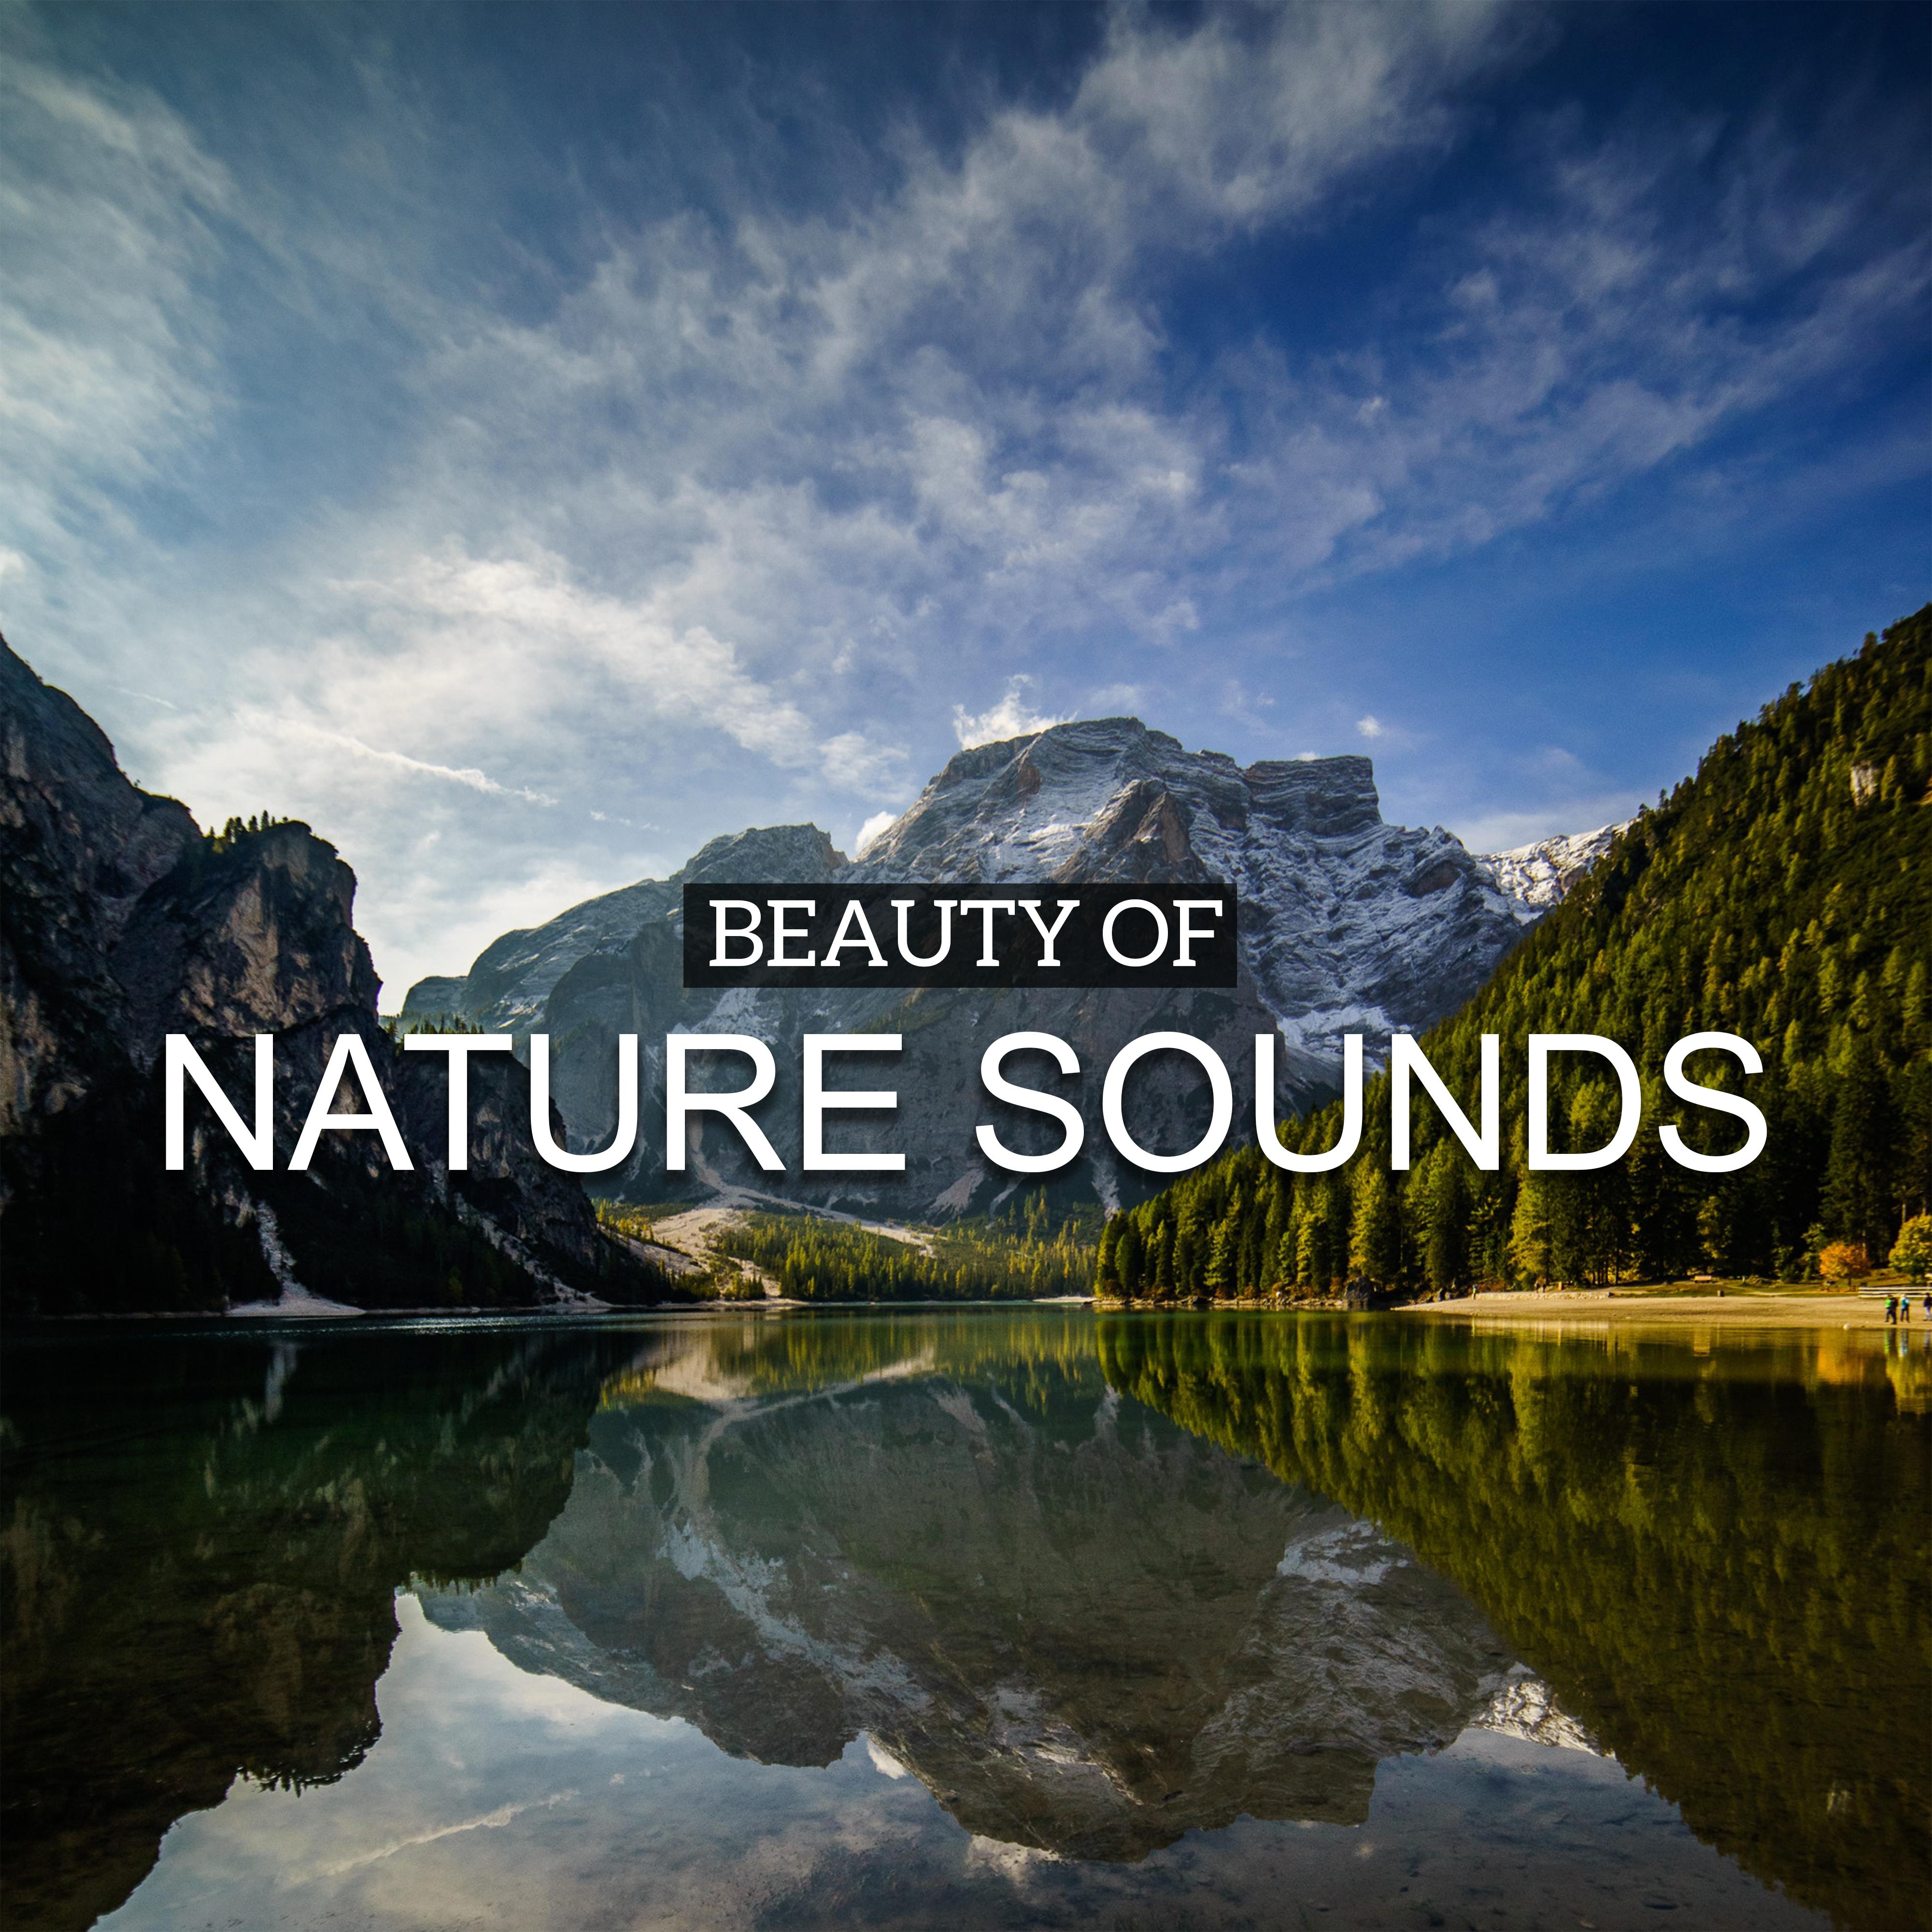 Beauty of Nature Sounds